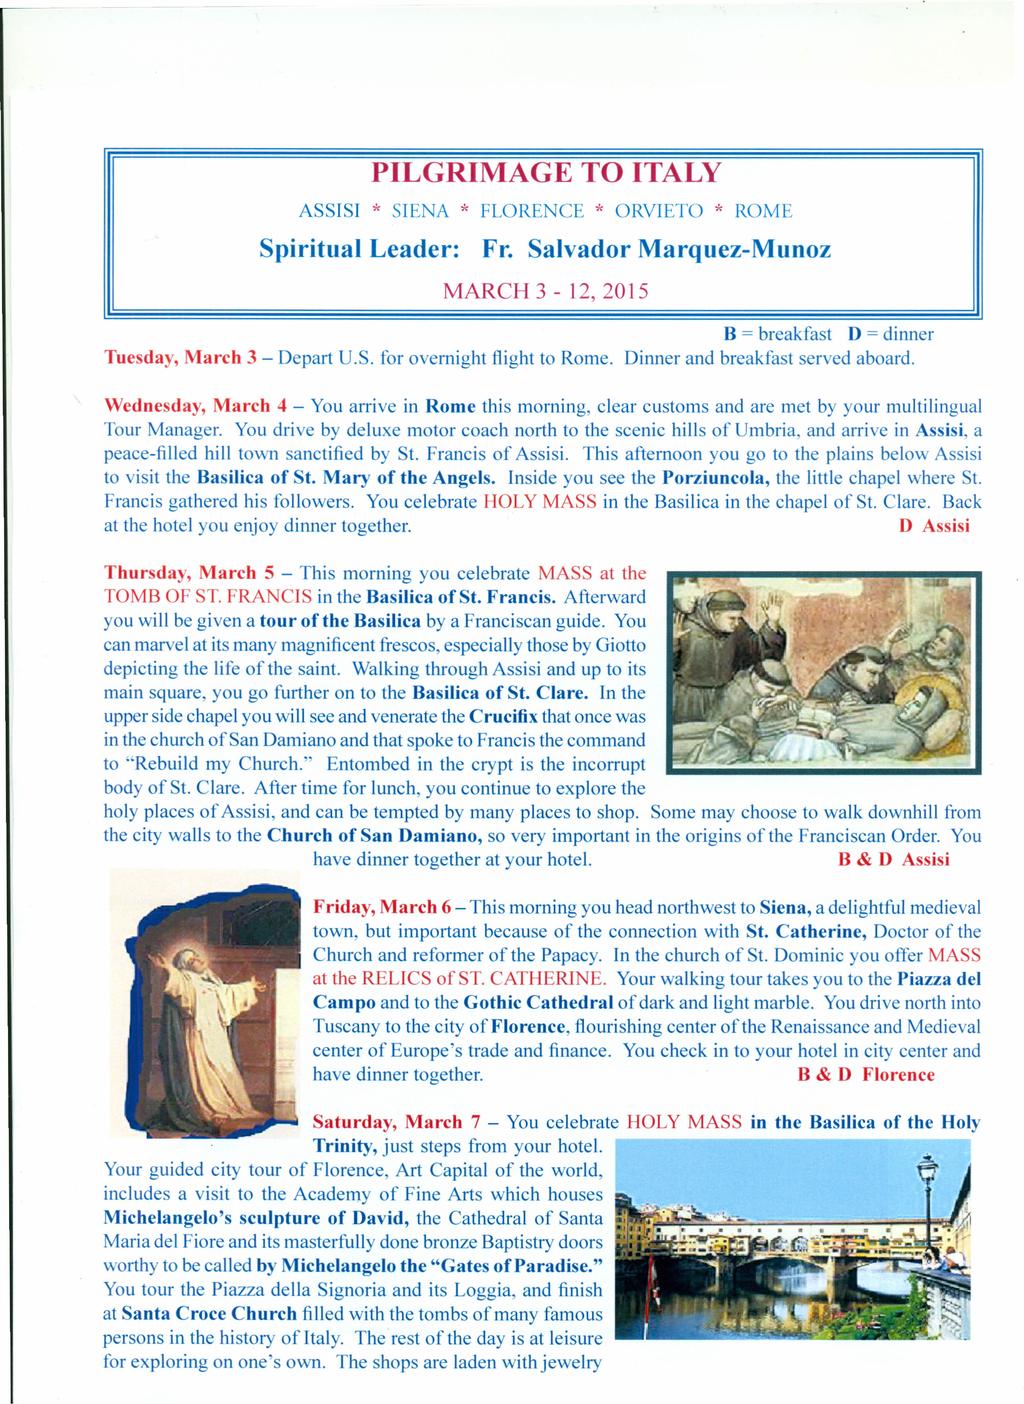 ASSISI SIENA Spiritual Leader: FLORENCE ORVIETO ROME Fr. Salvador Marquez-Munoz MARCH 3-12,2015 B = breakfast D = dinner Tuesday, March 3 - Depart U.S. for overnight flight to Rome.